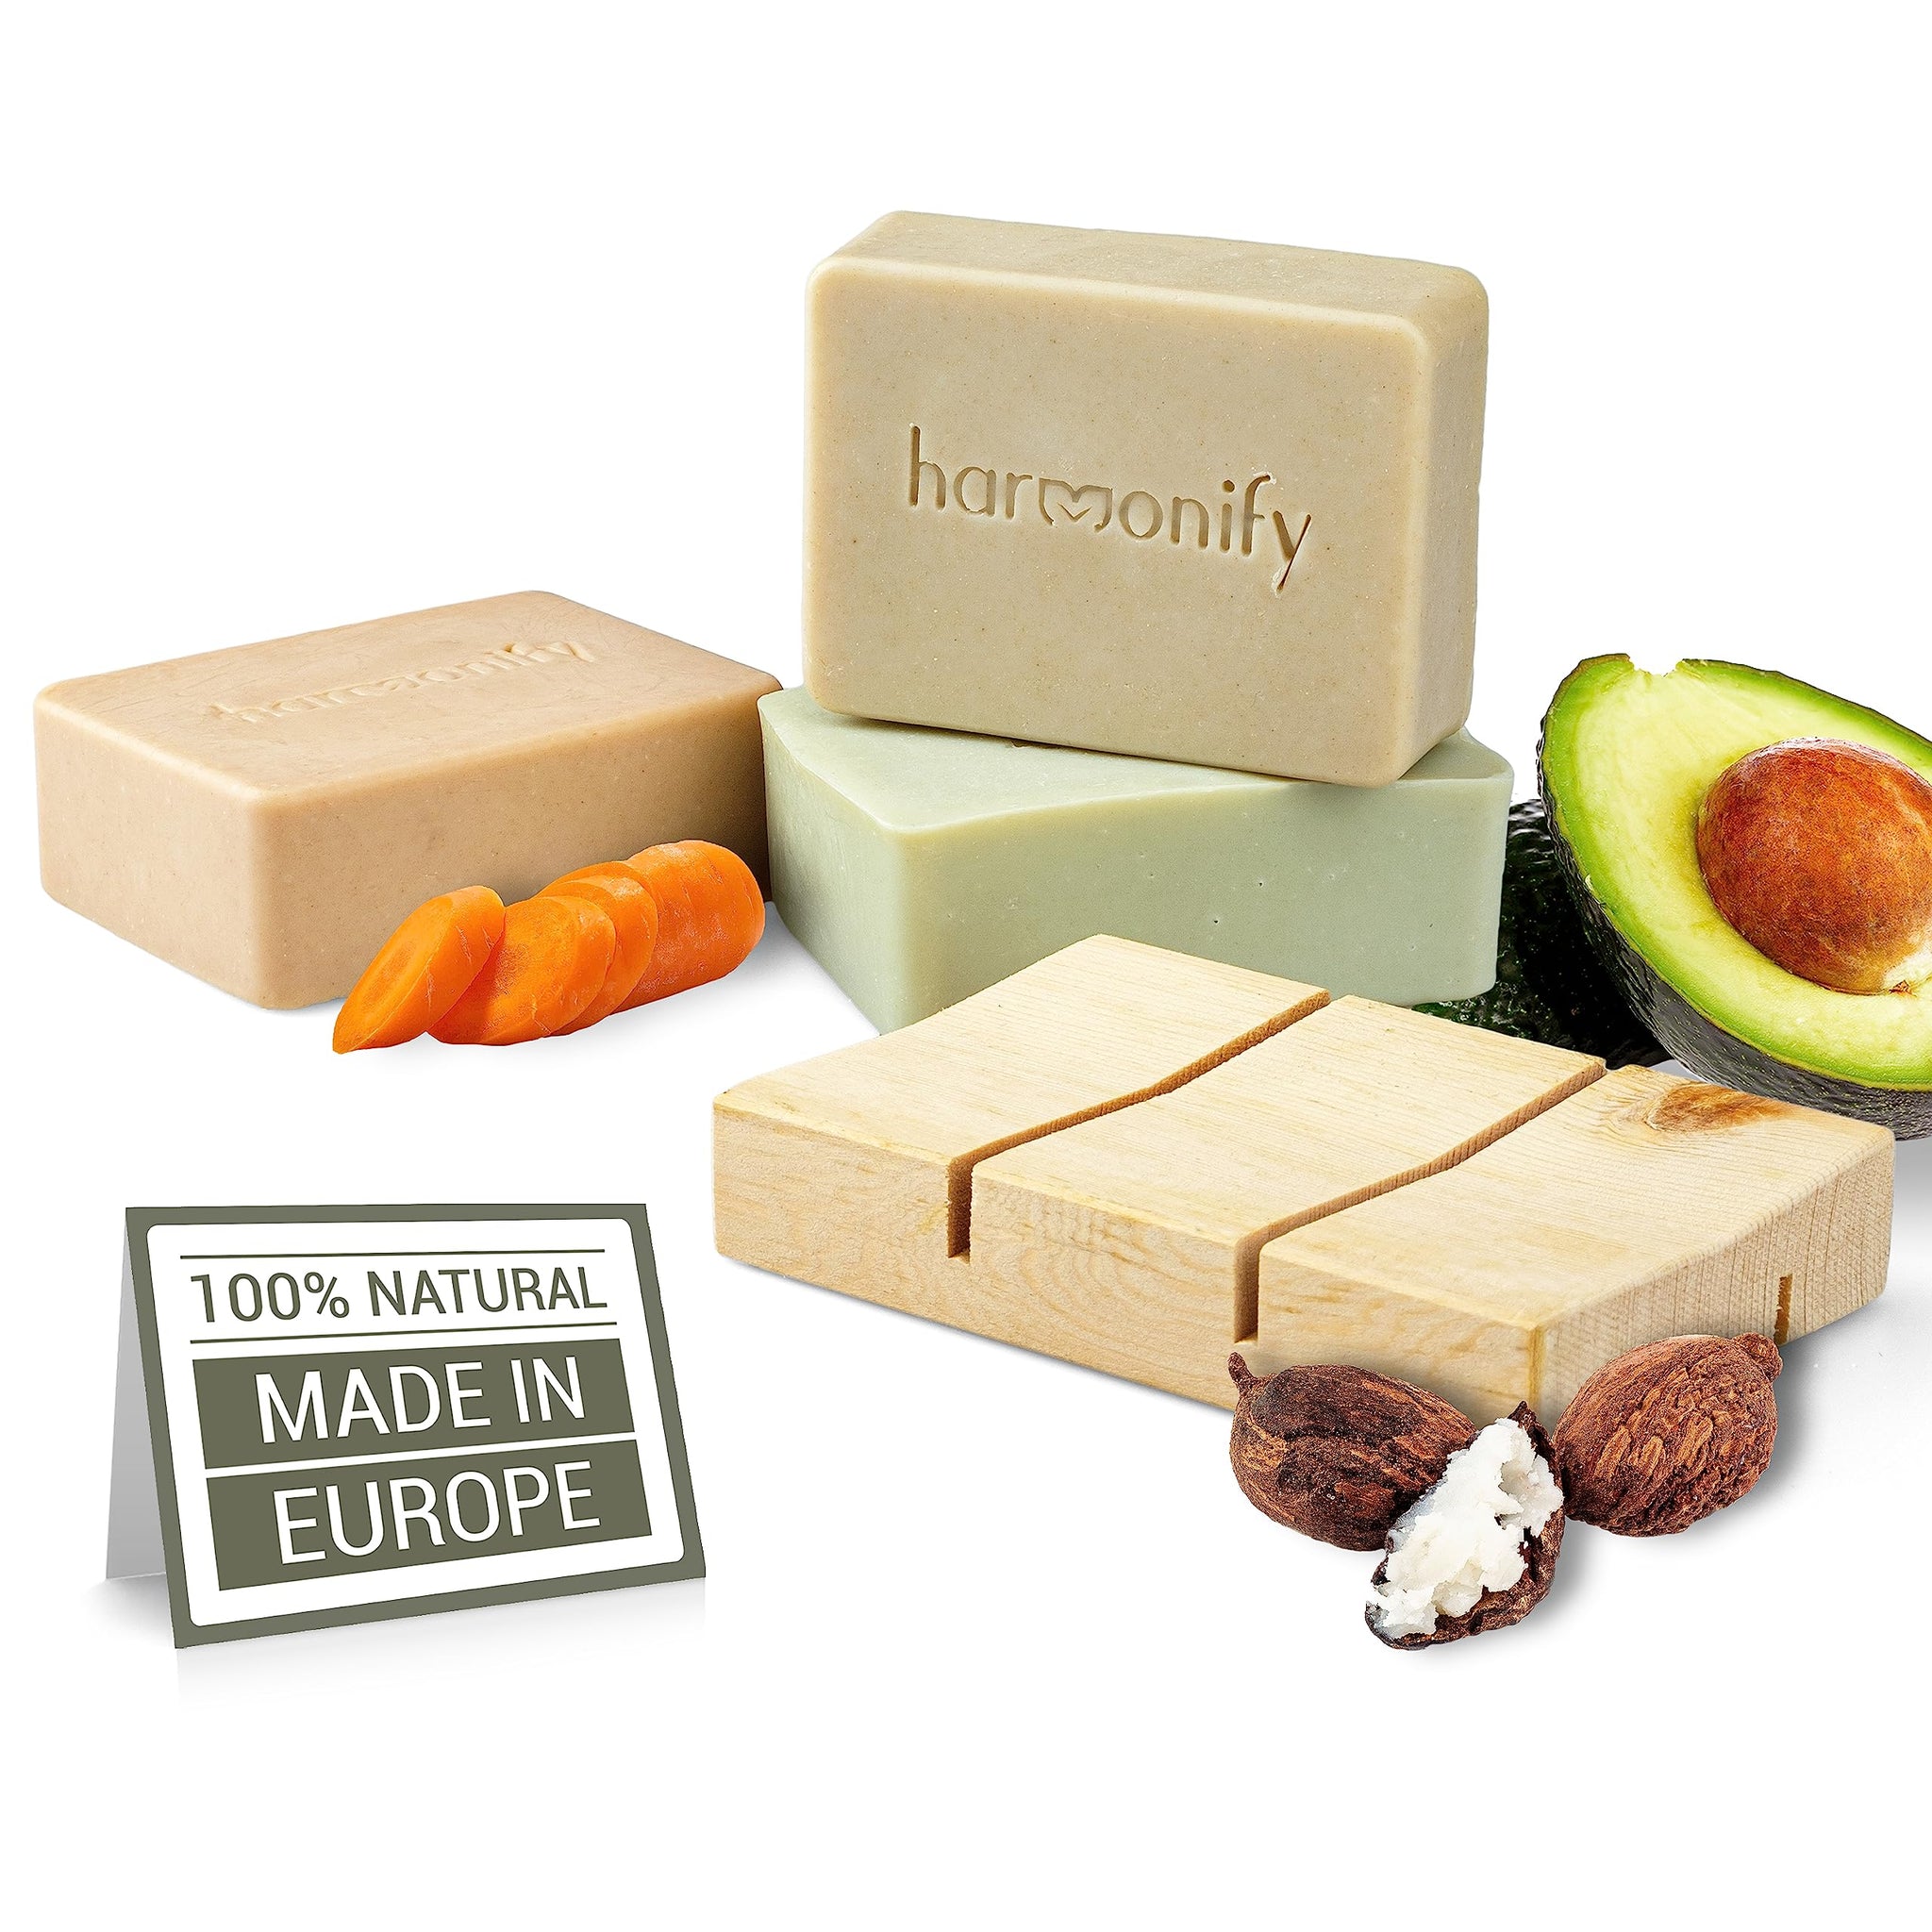 All Natural 3 Set of Soap Bars, (Avocado, Carrot, Shea Butter) with Wooden Soap Dish, Assortment of Hand-Made Soaps, Skin Revitalizing and Moisturizing, Healthy, Made in Europe.